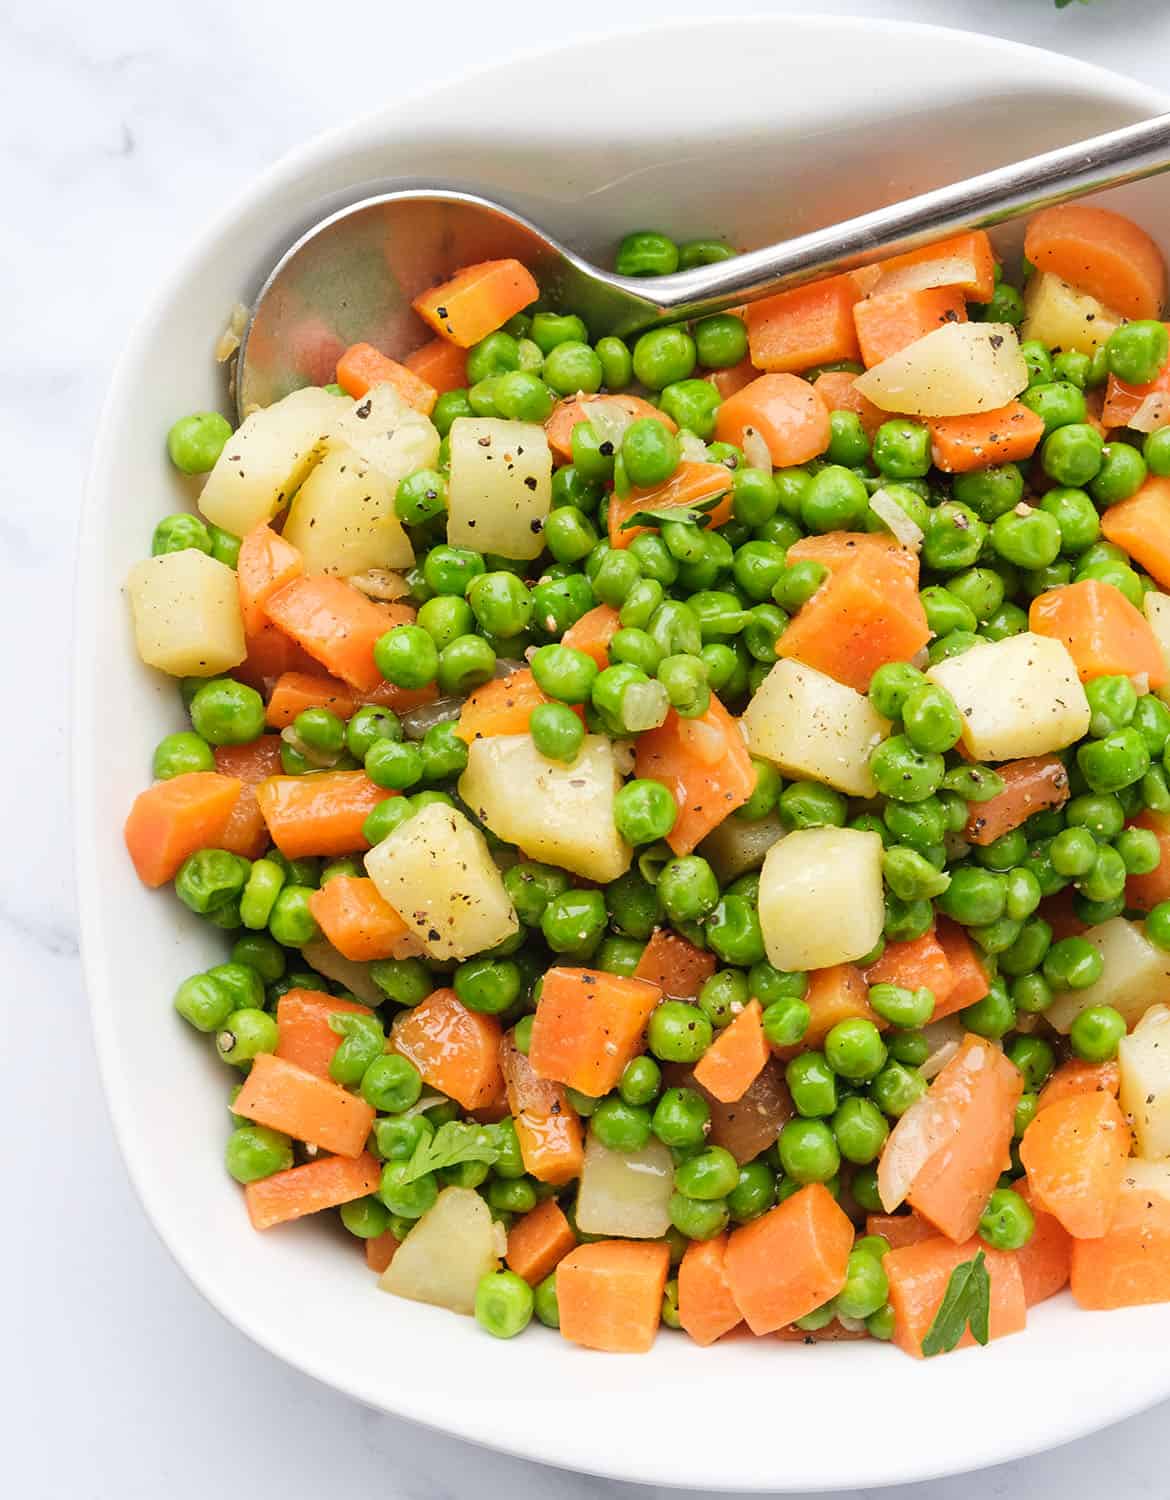 Peas and Carrots (One Pan) - The clever meal